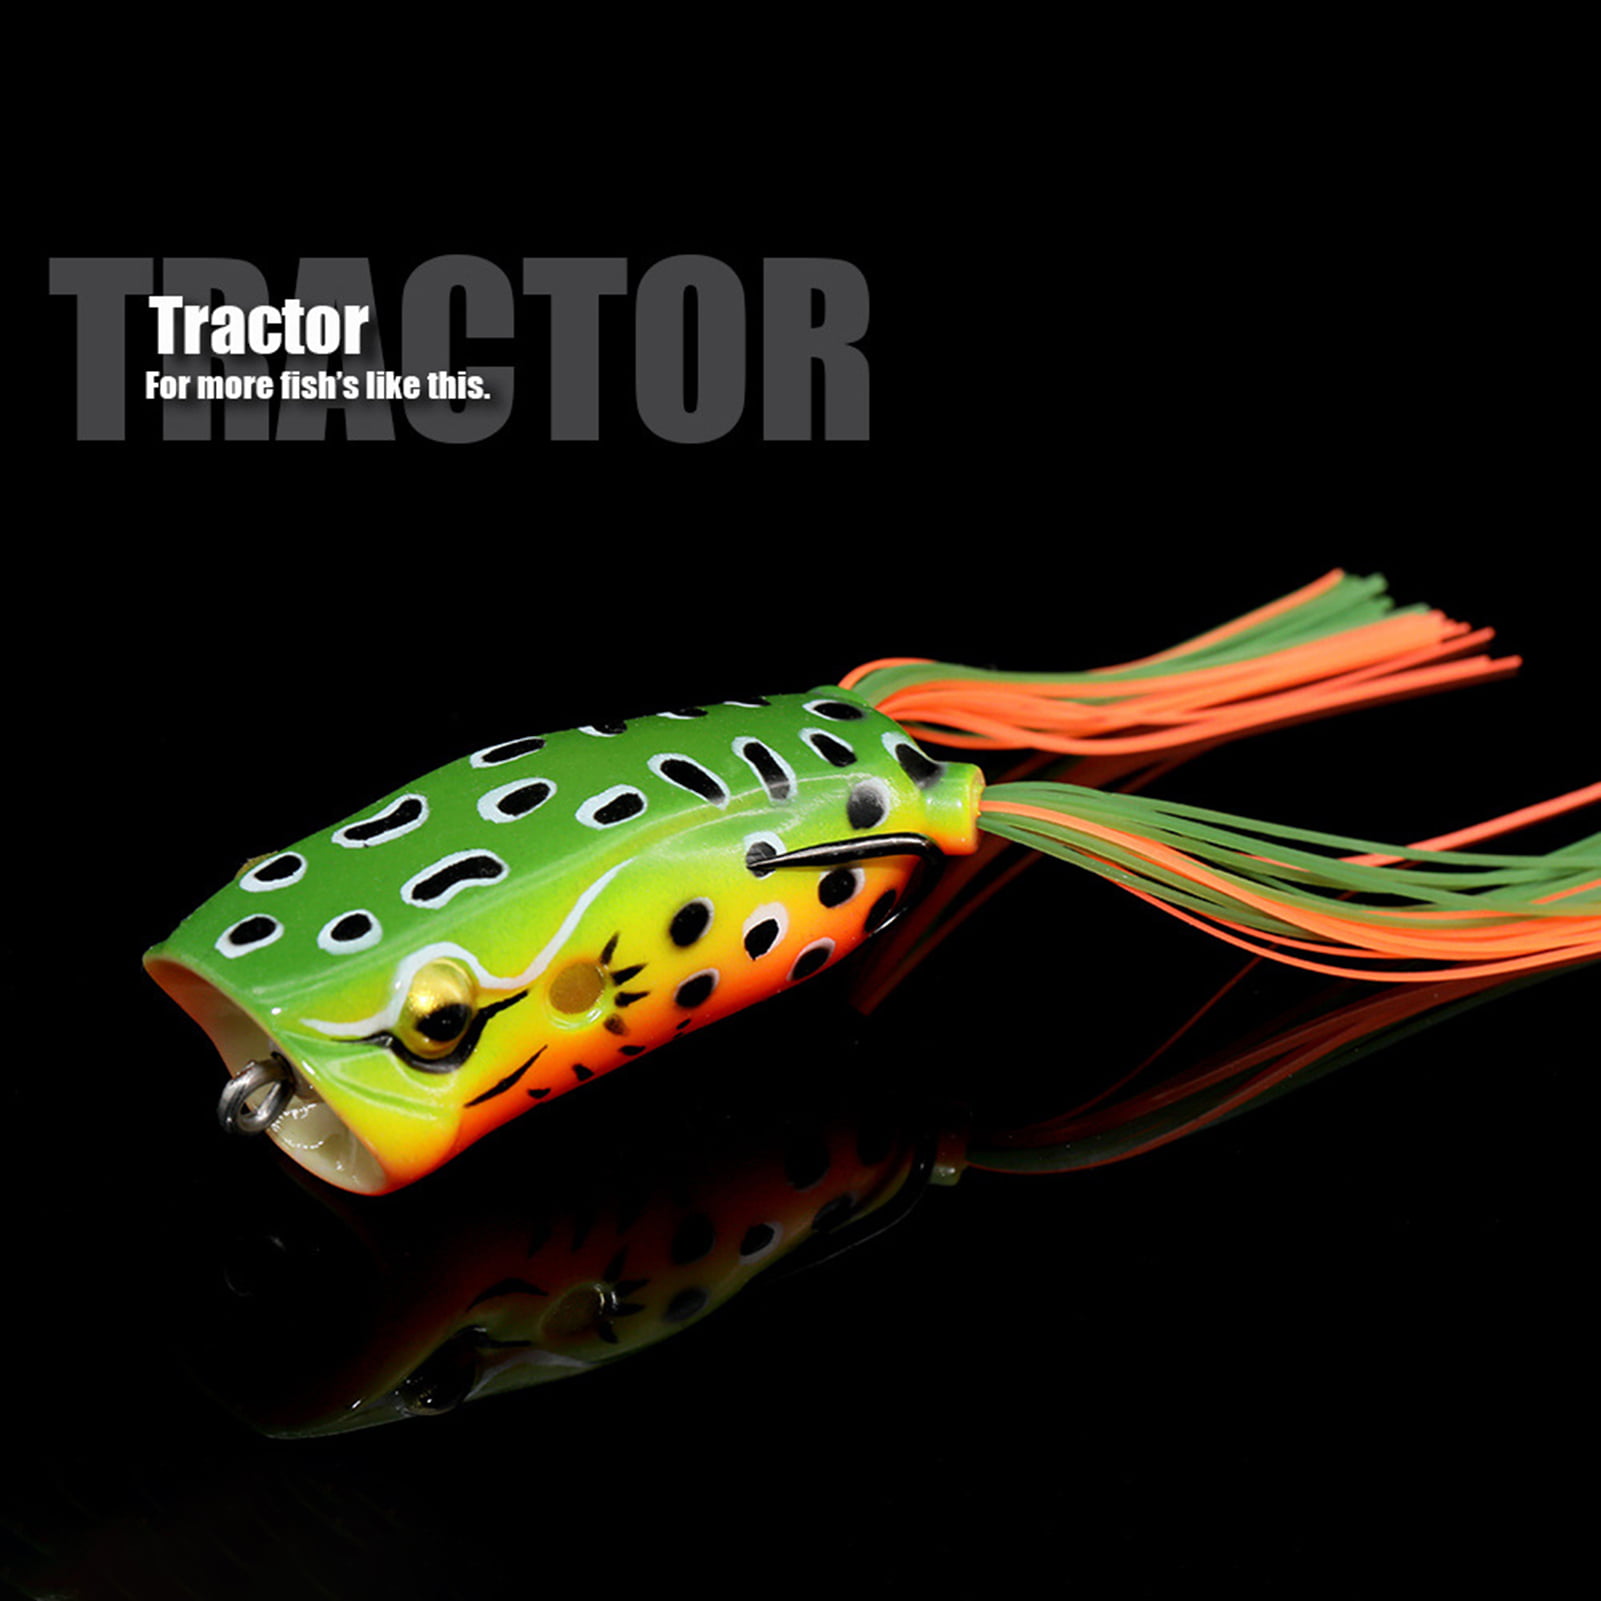 DOITPE Floating Weedless Lure Frog Baits with Double Sharp Hooks Hard Baits  Simulation Frog Snake Head Lure in Freshwater and Saltwater (Color F)  (Color: Color F)